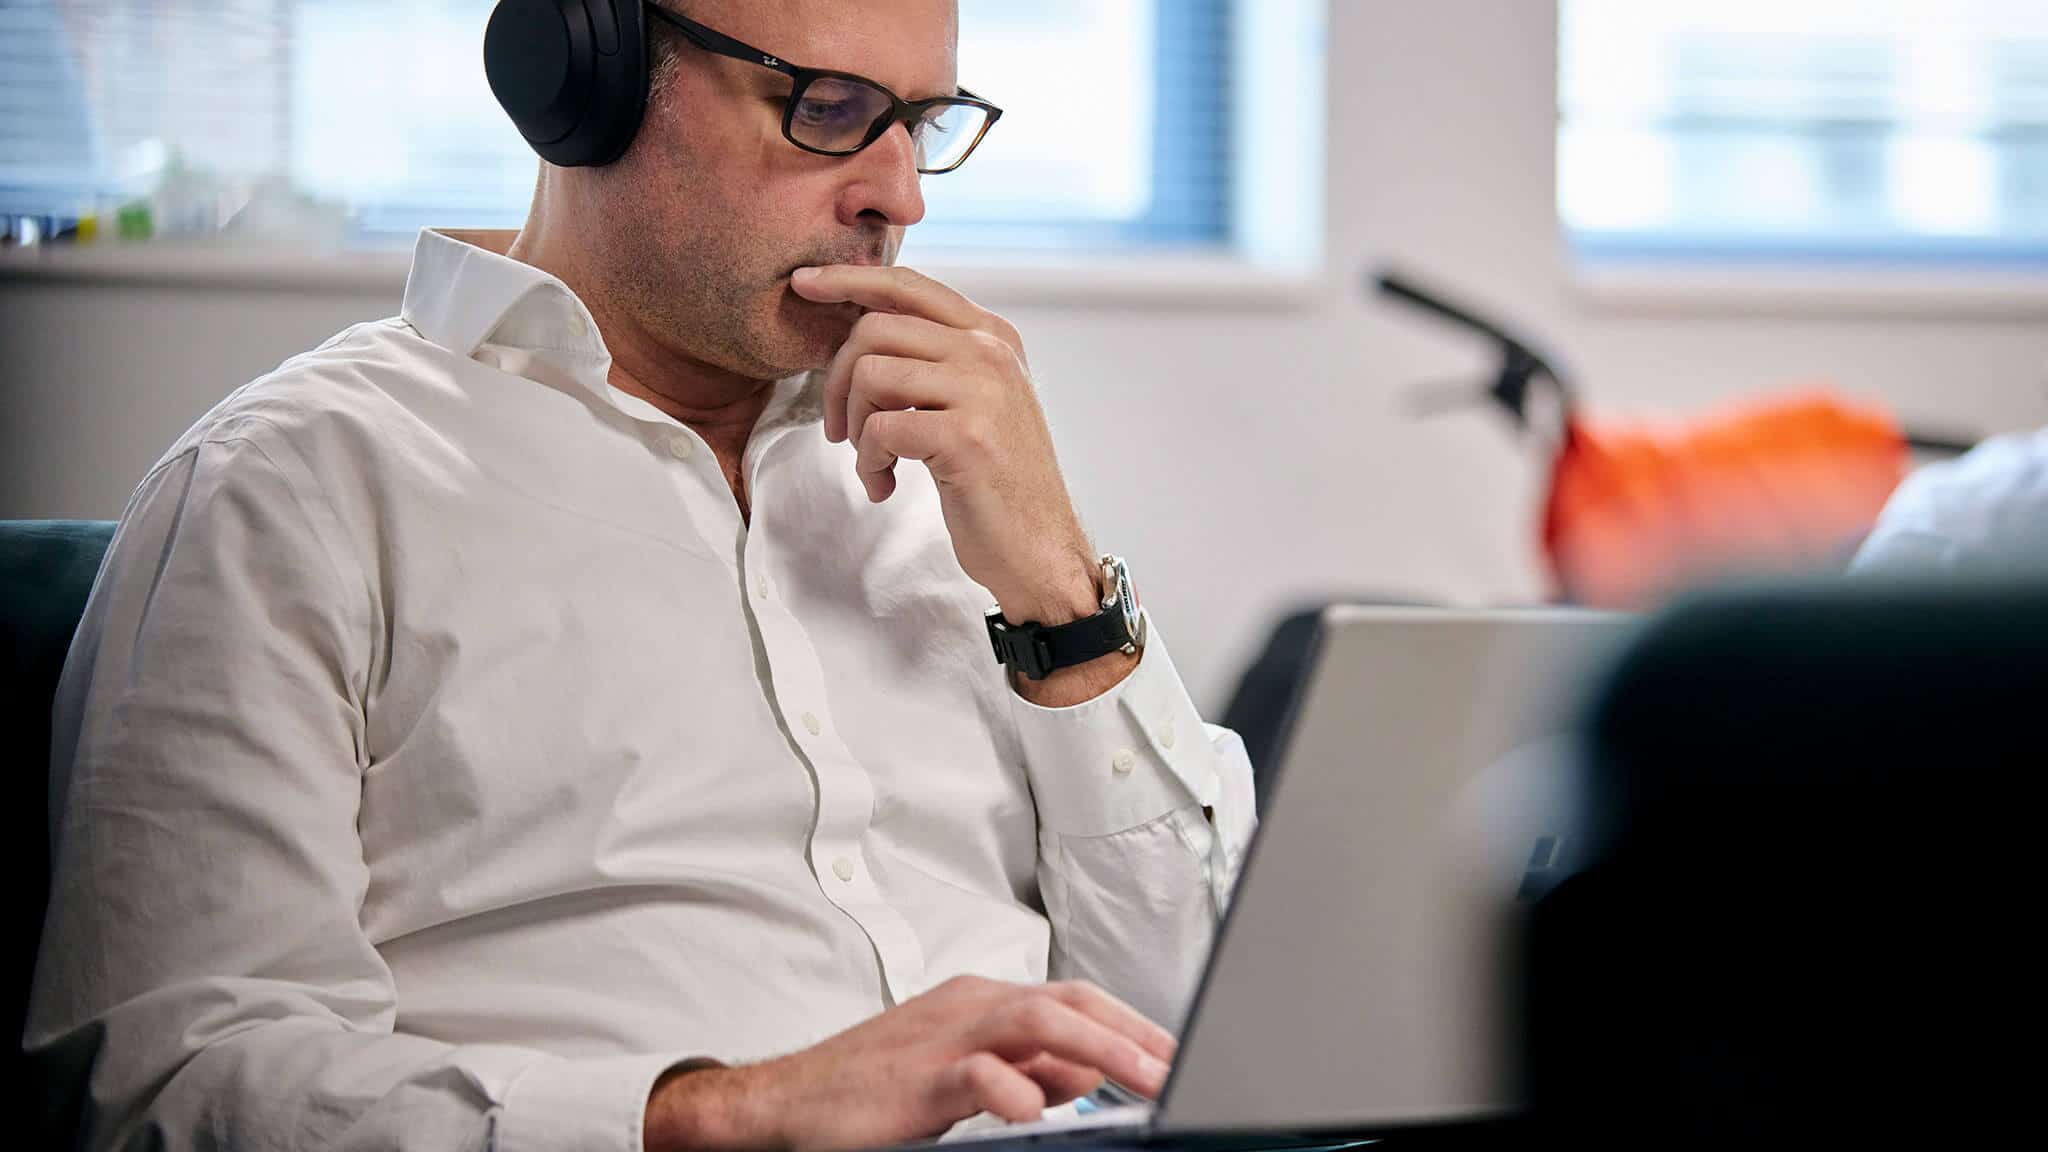 Man in white shirt with glasses and headset staring at laptop screen